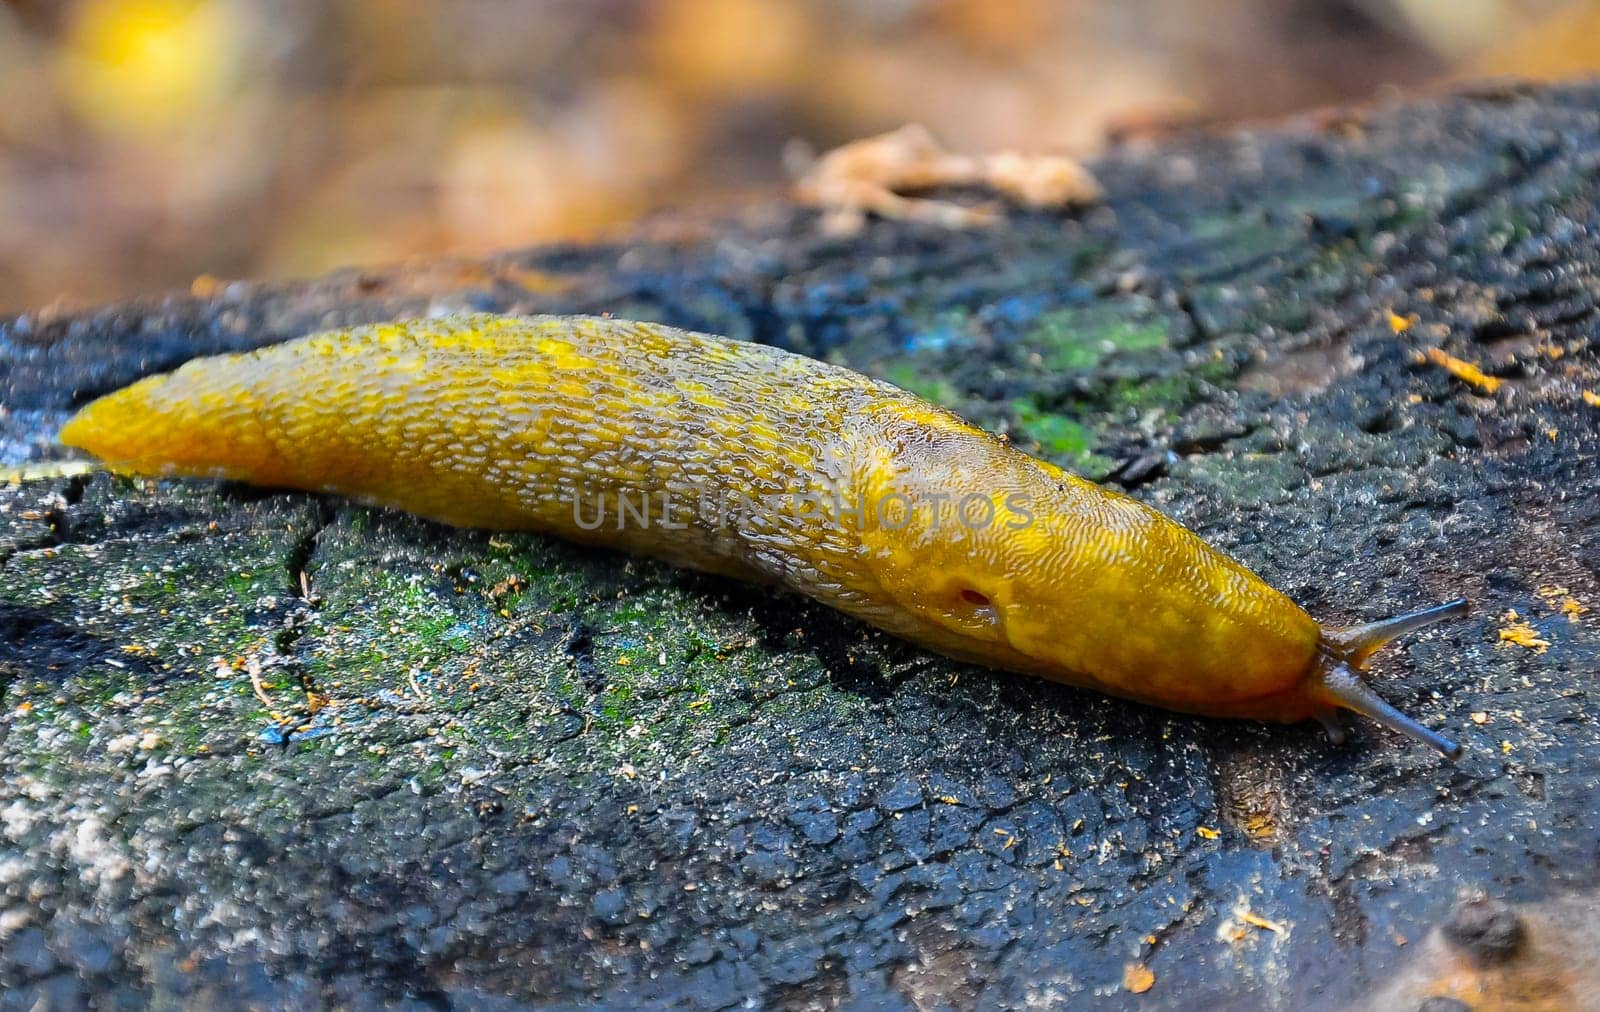 A yellow slippery Slug crawls along the ground. Agricultural pest